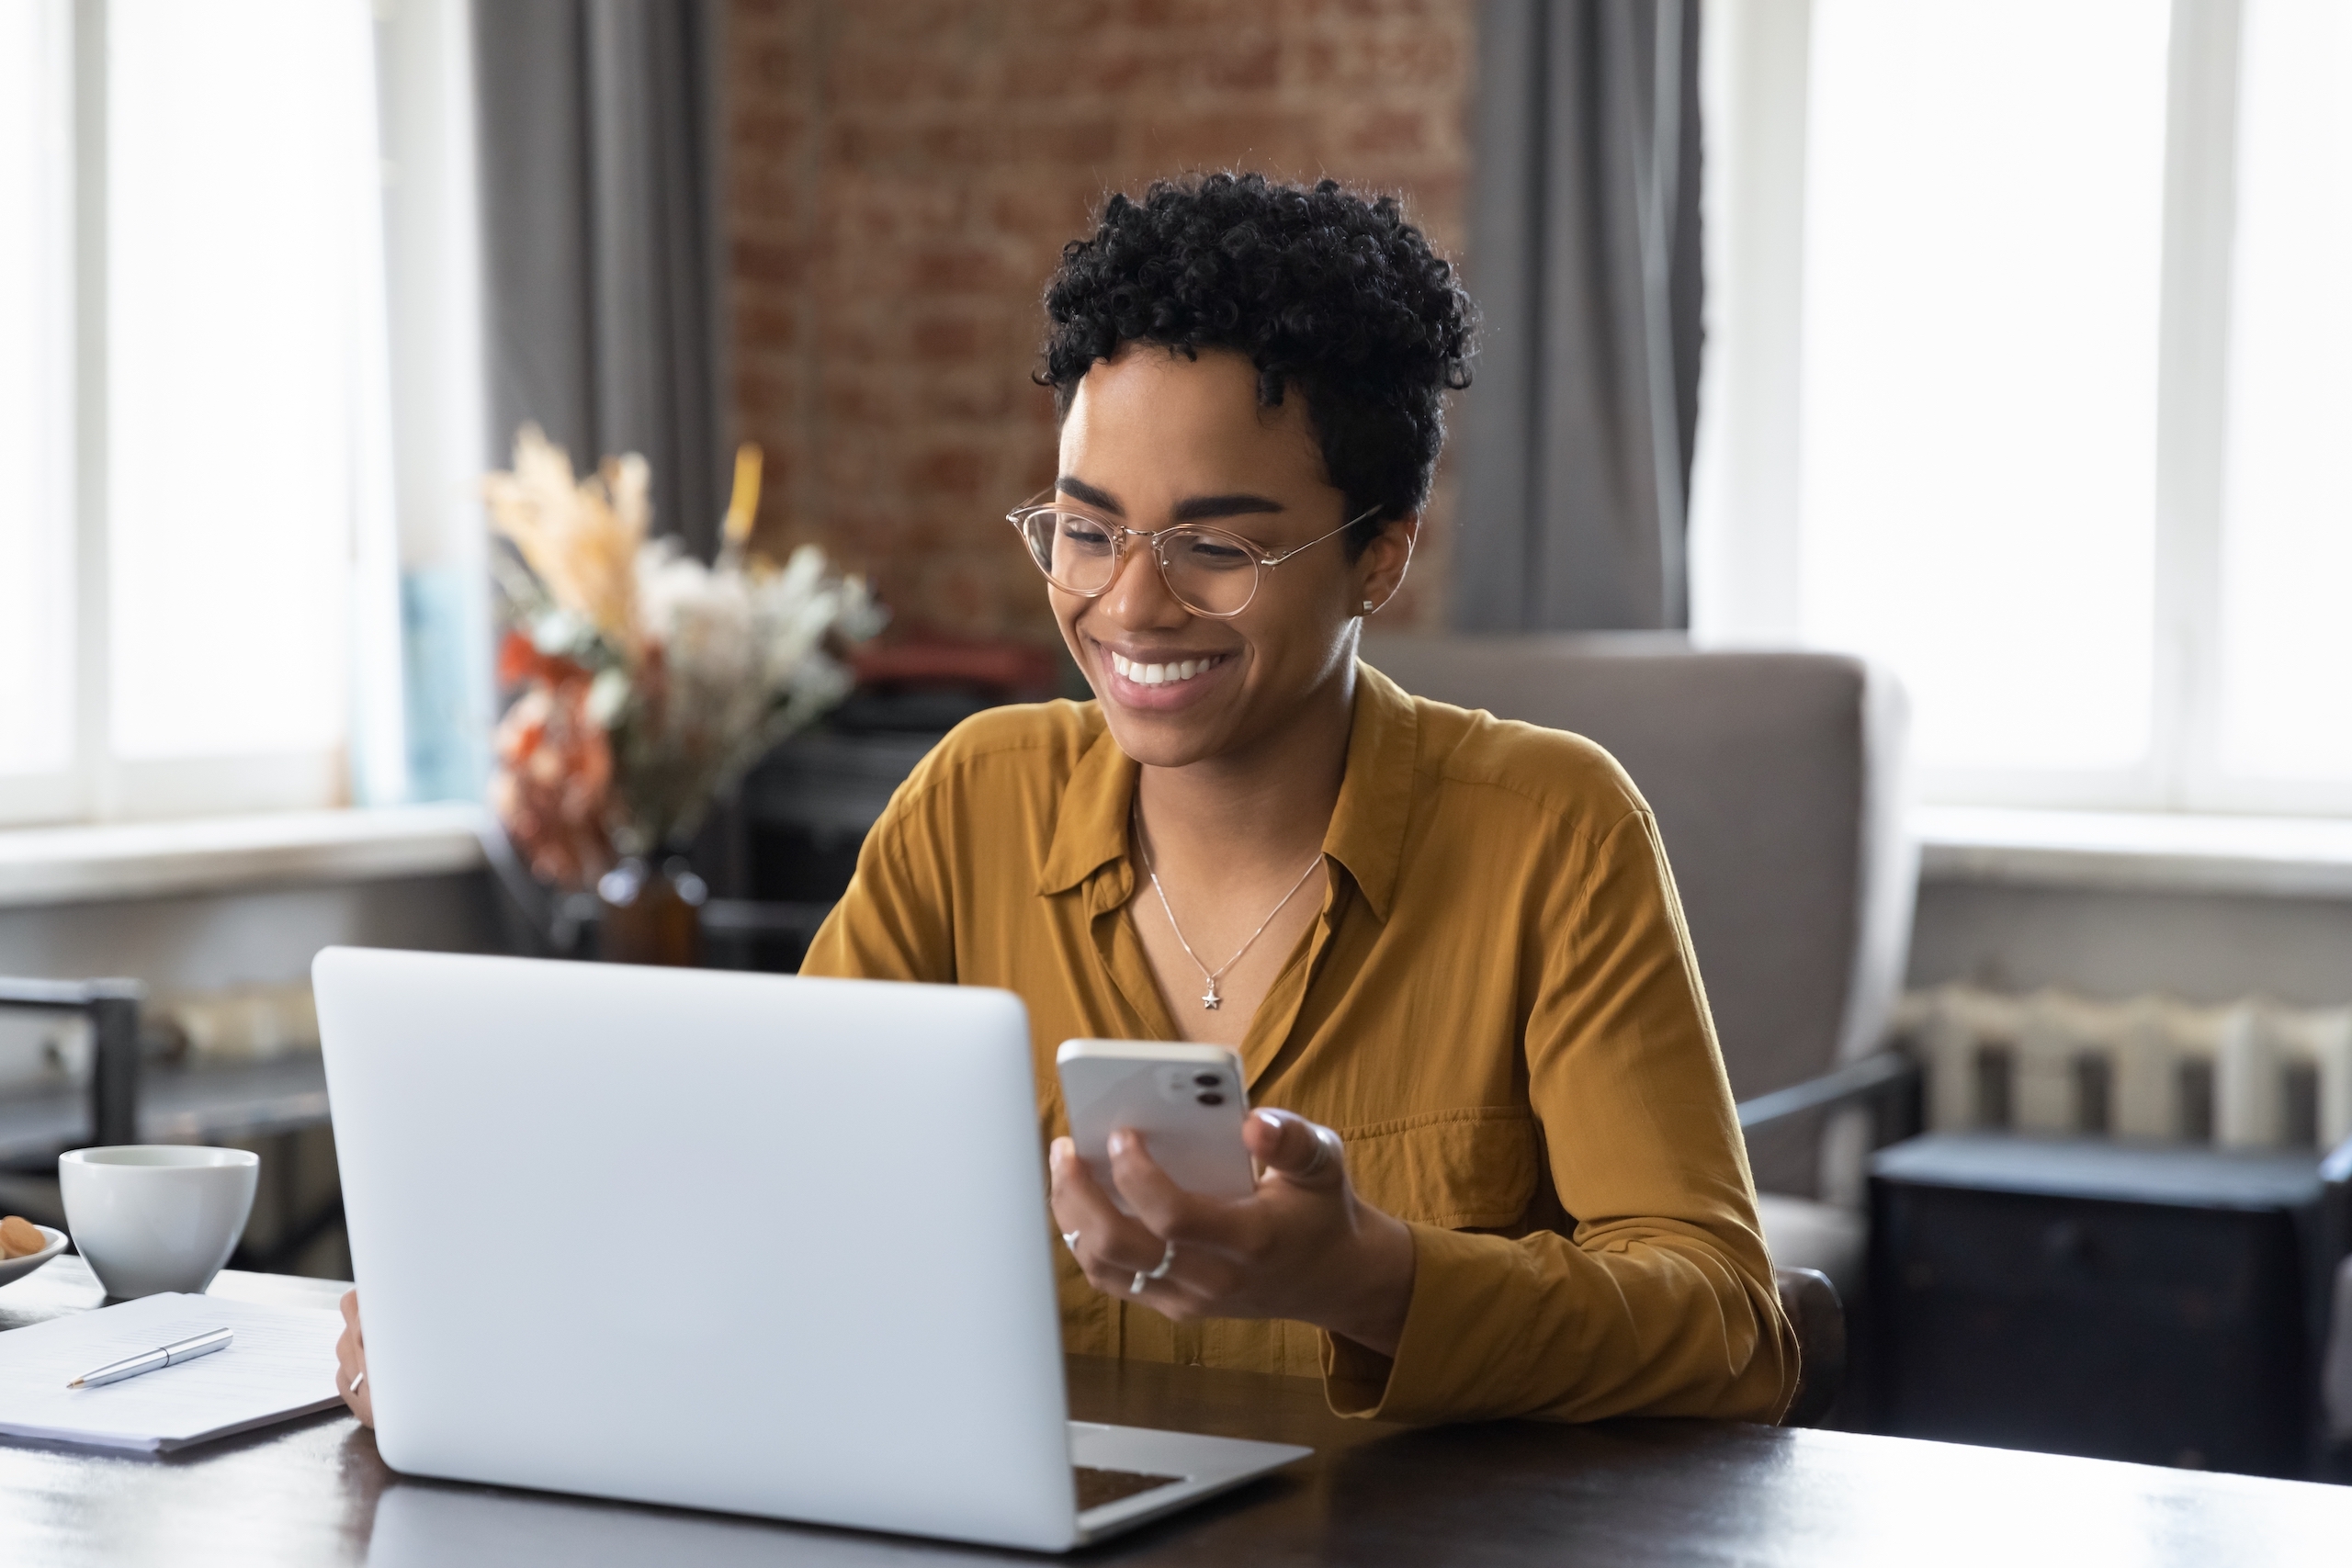 A woman happily multitasks, smiling as she uses her laptop and cell phone simultaneously.